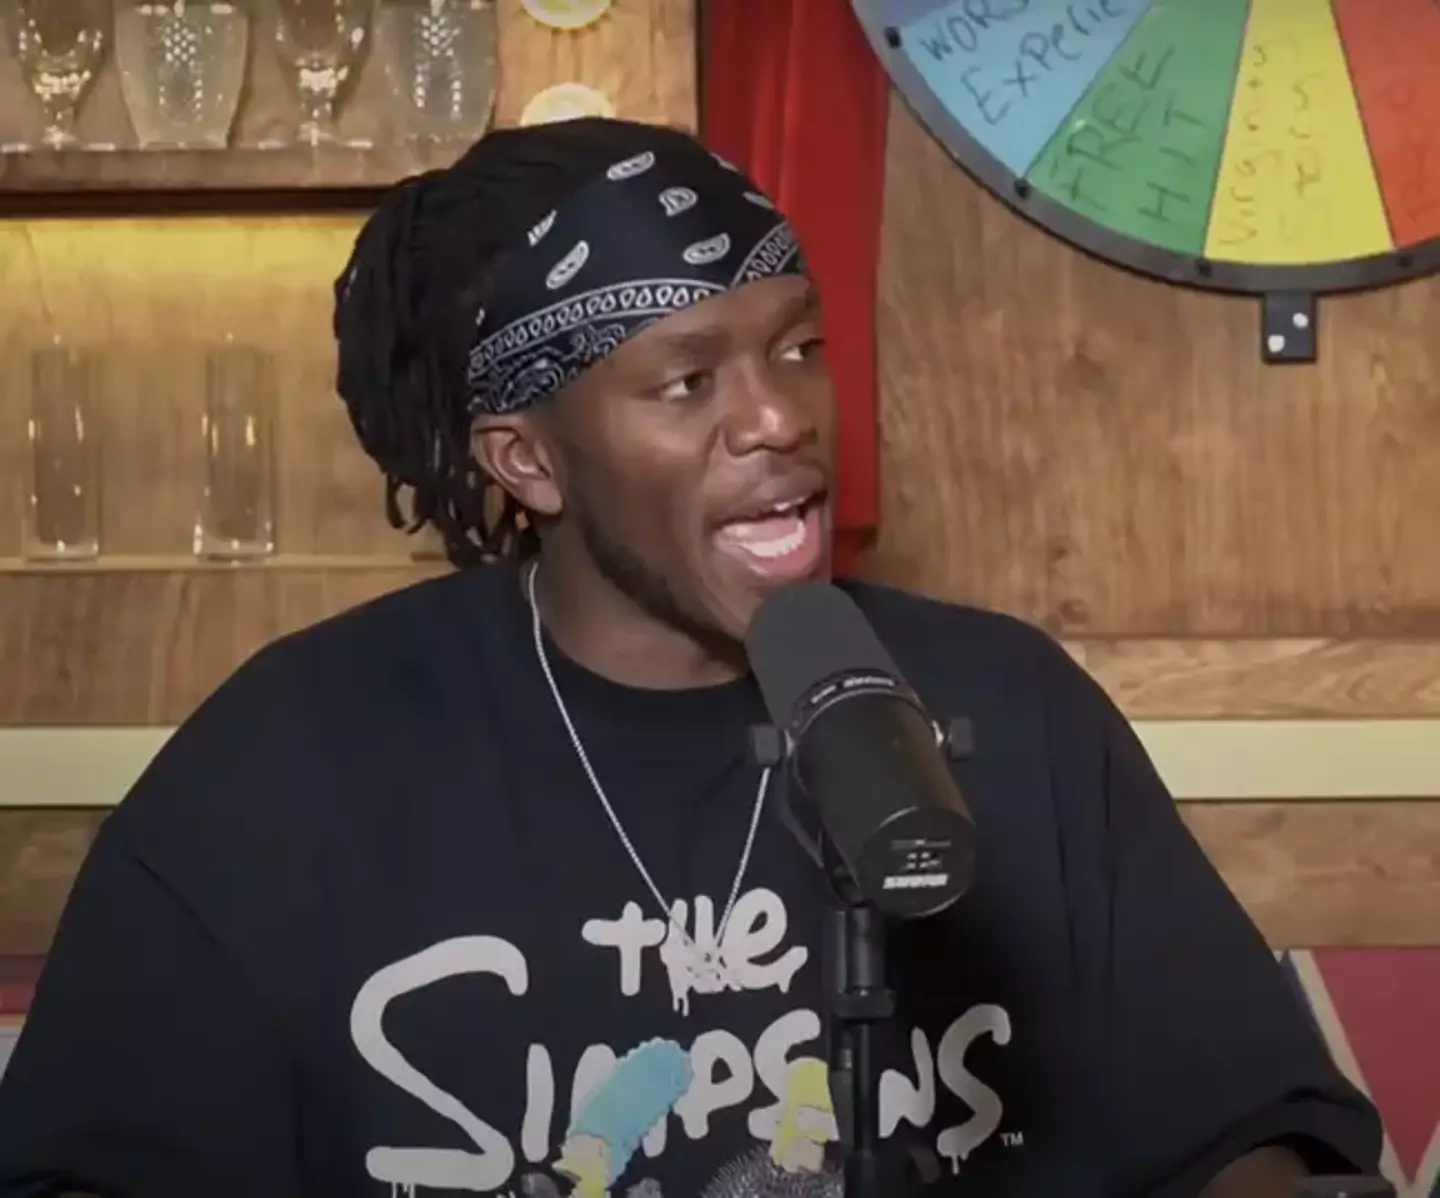 KSI has blamed a shortage of his energy drink on supermarket workers.